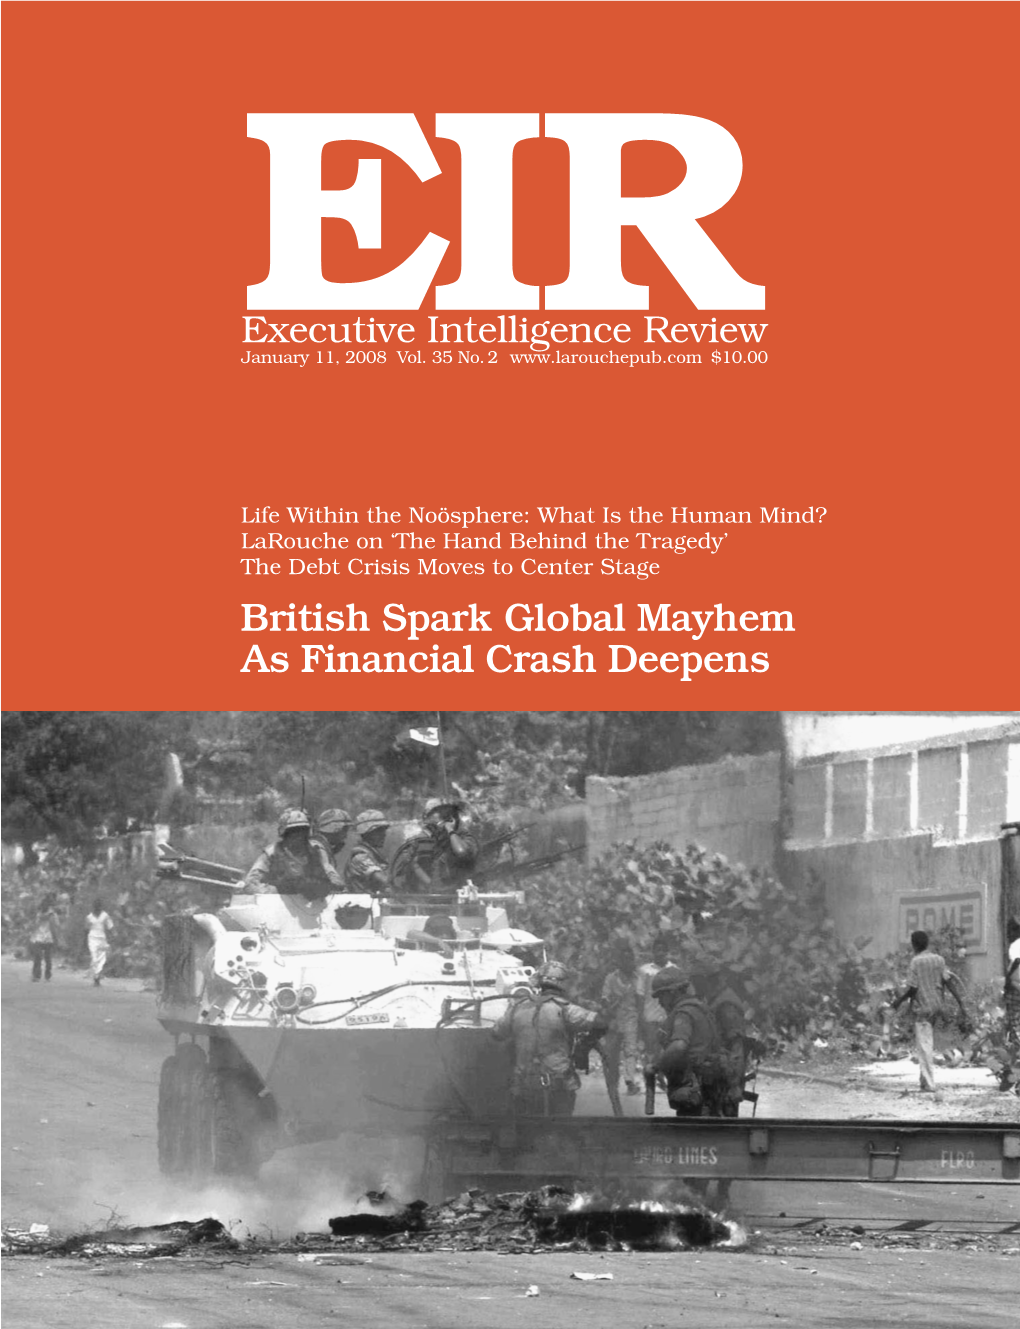 Executive Intelligence Review, Volume 35, Number 2, January 11